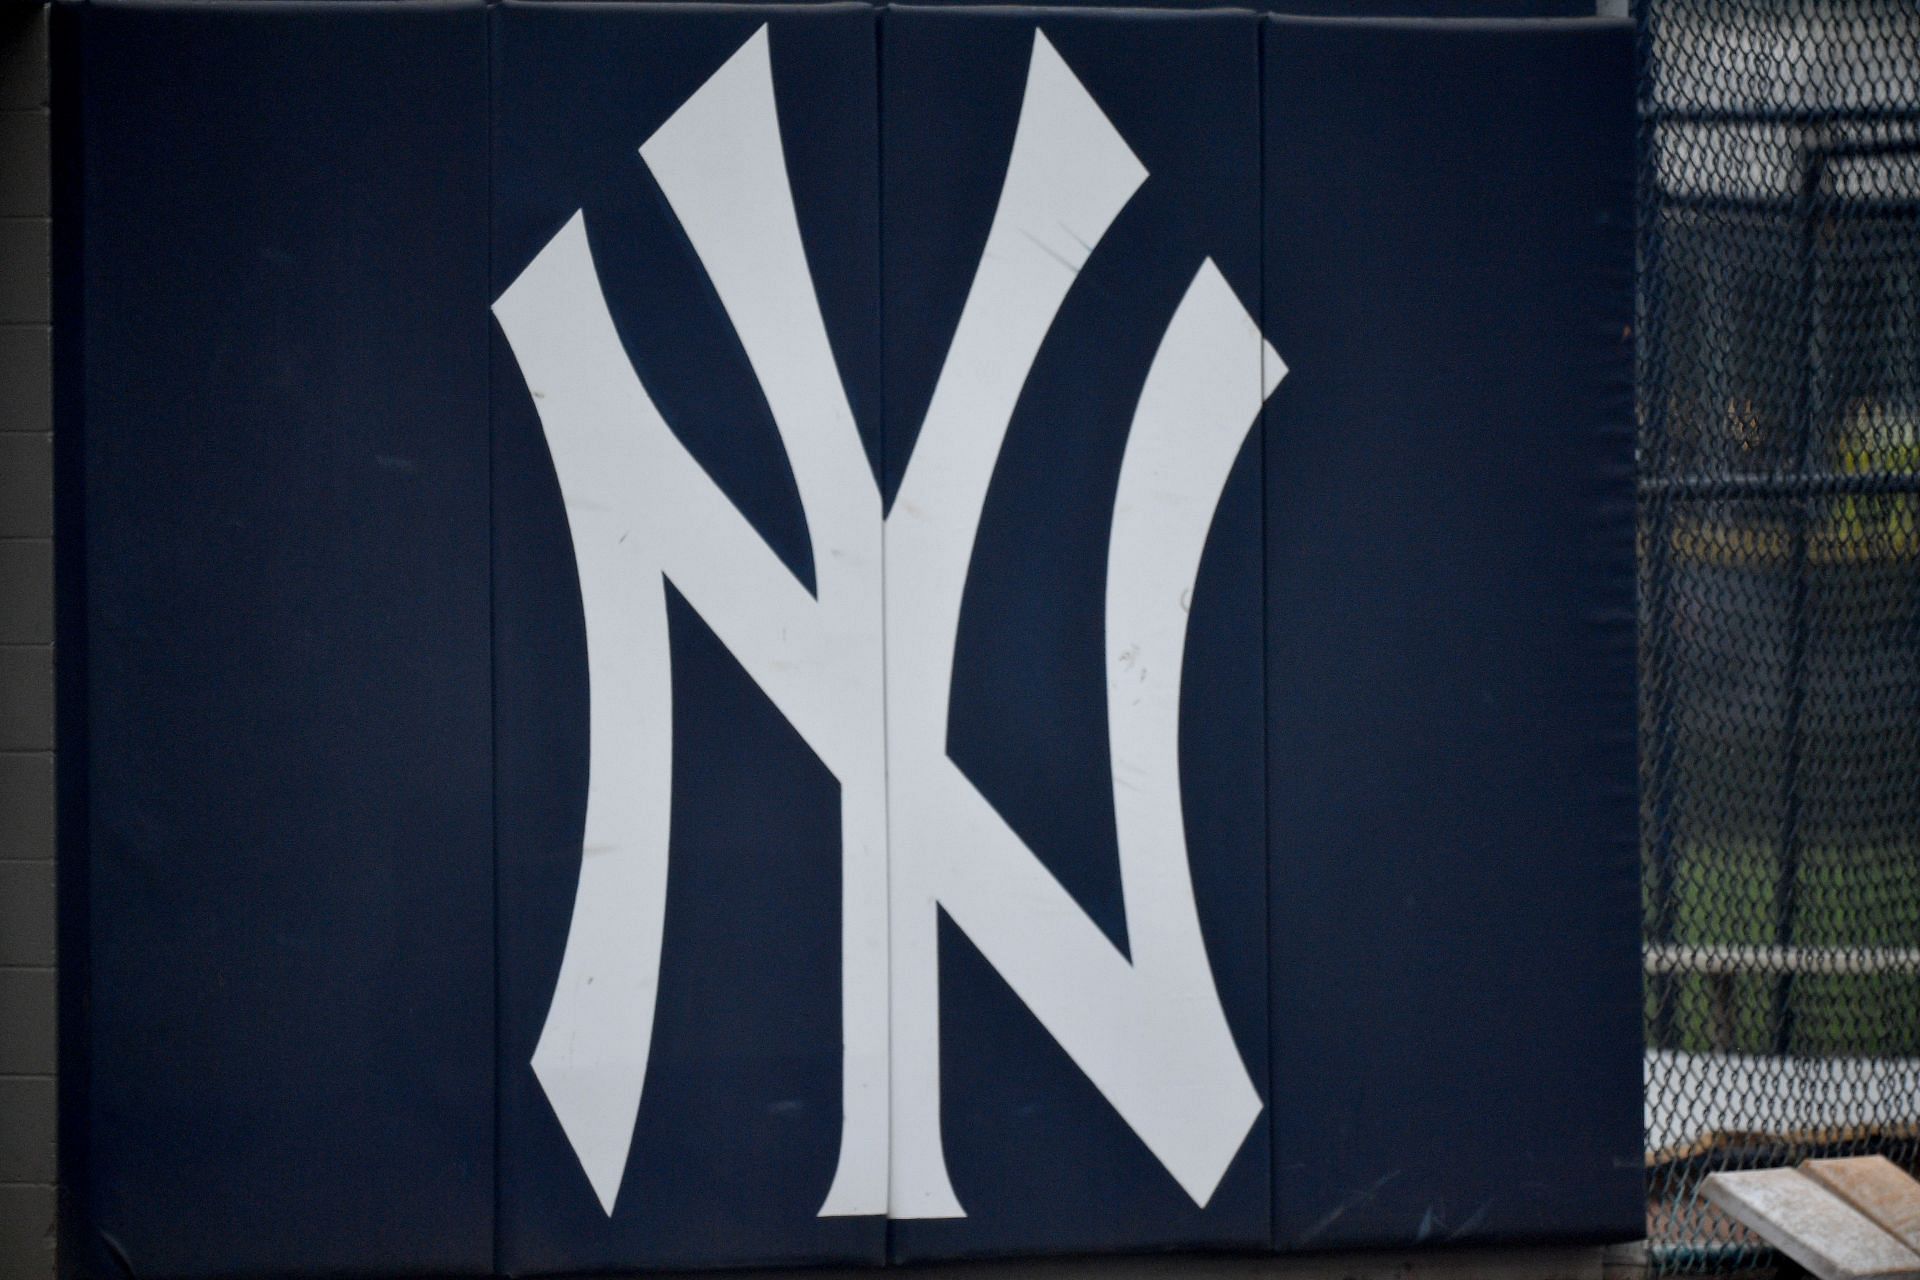 New York Yankees prospect showboats and loses game.